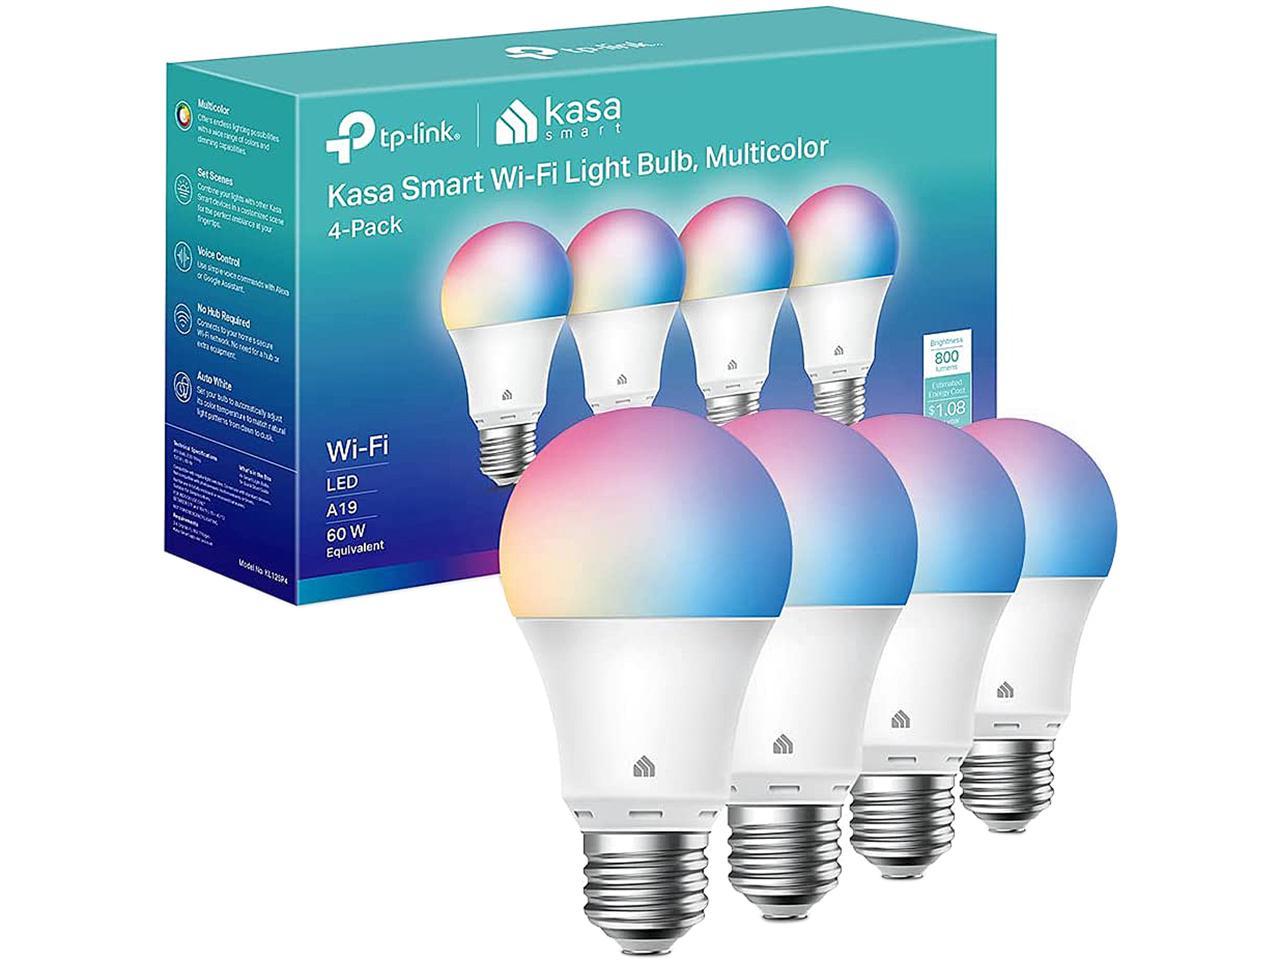 Kasa Smart Light Bulbs, Full Color Changing Smart WiFi Bulbs Compatible with Alexa and Google Home, A19, 9W 800 Lumens,2.4Ghz only, No Hub Required, 4-Pack (KL125P4) - Newegg.com